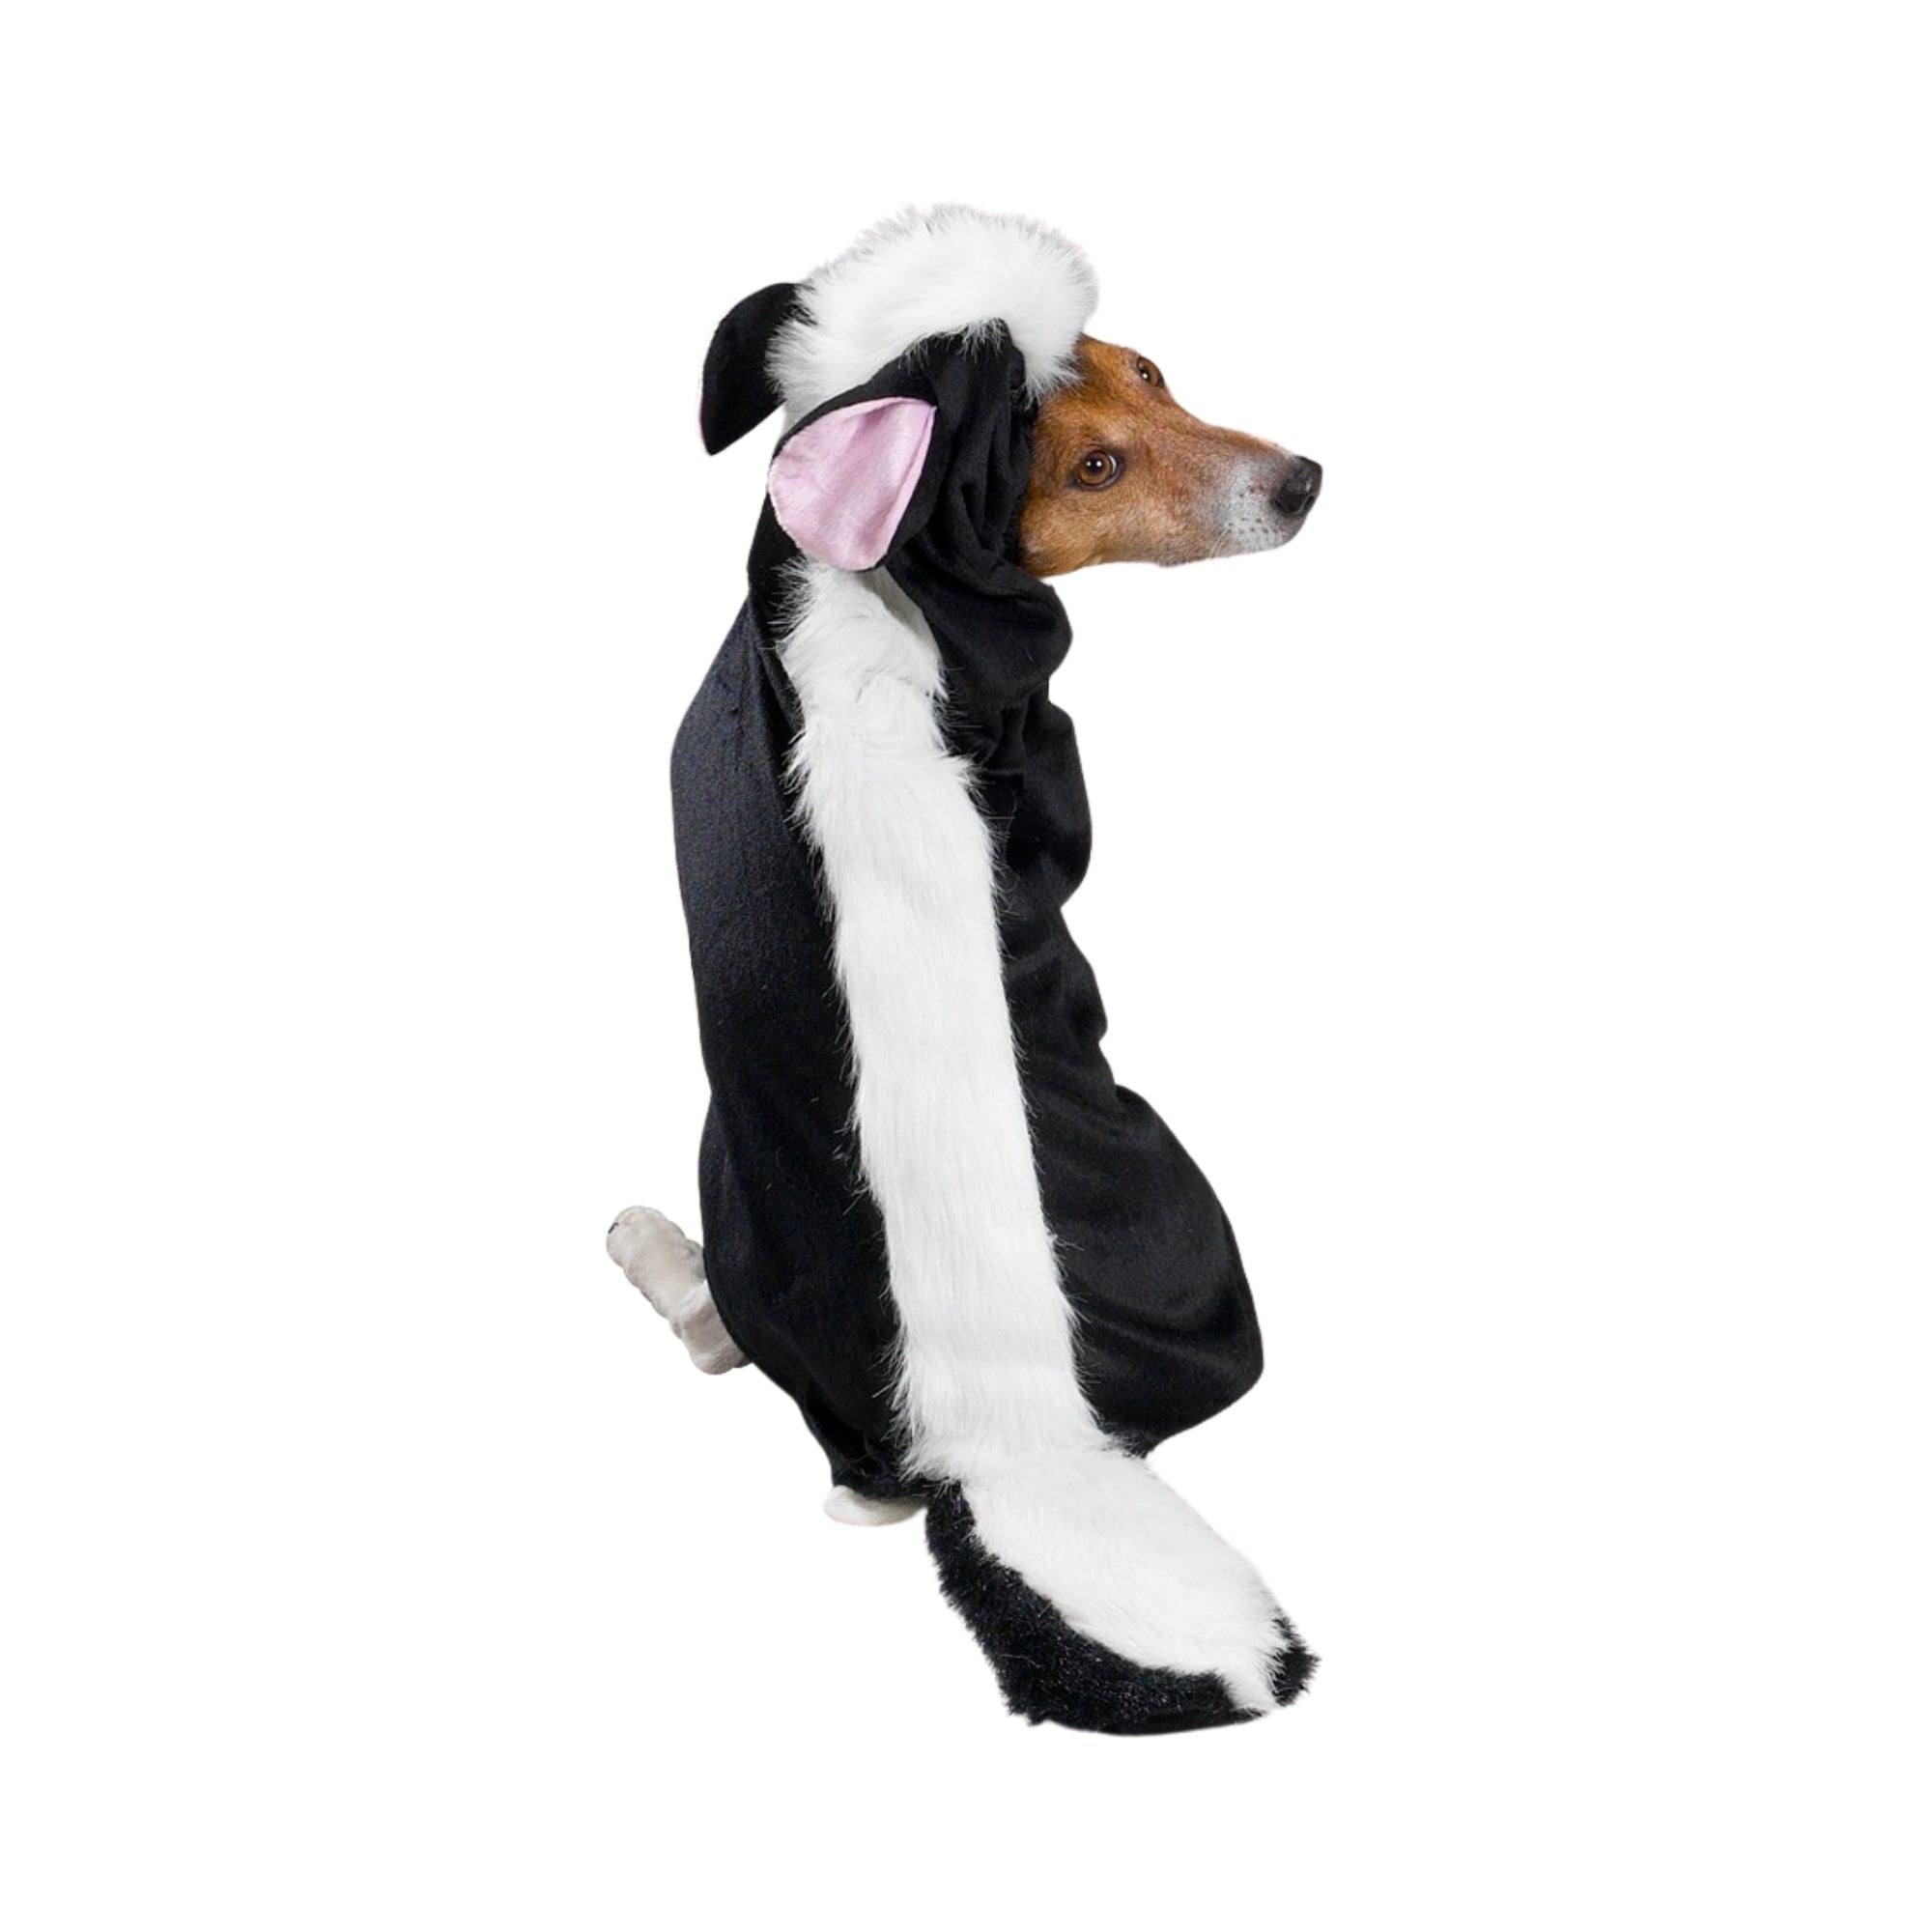 Casual Canine Lil’ Stinker Dog Costume, X Small Black & White Skunk Costume for Your Dog 8”